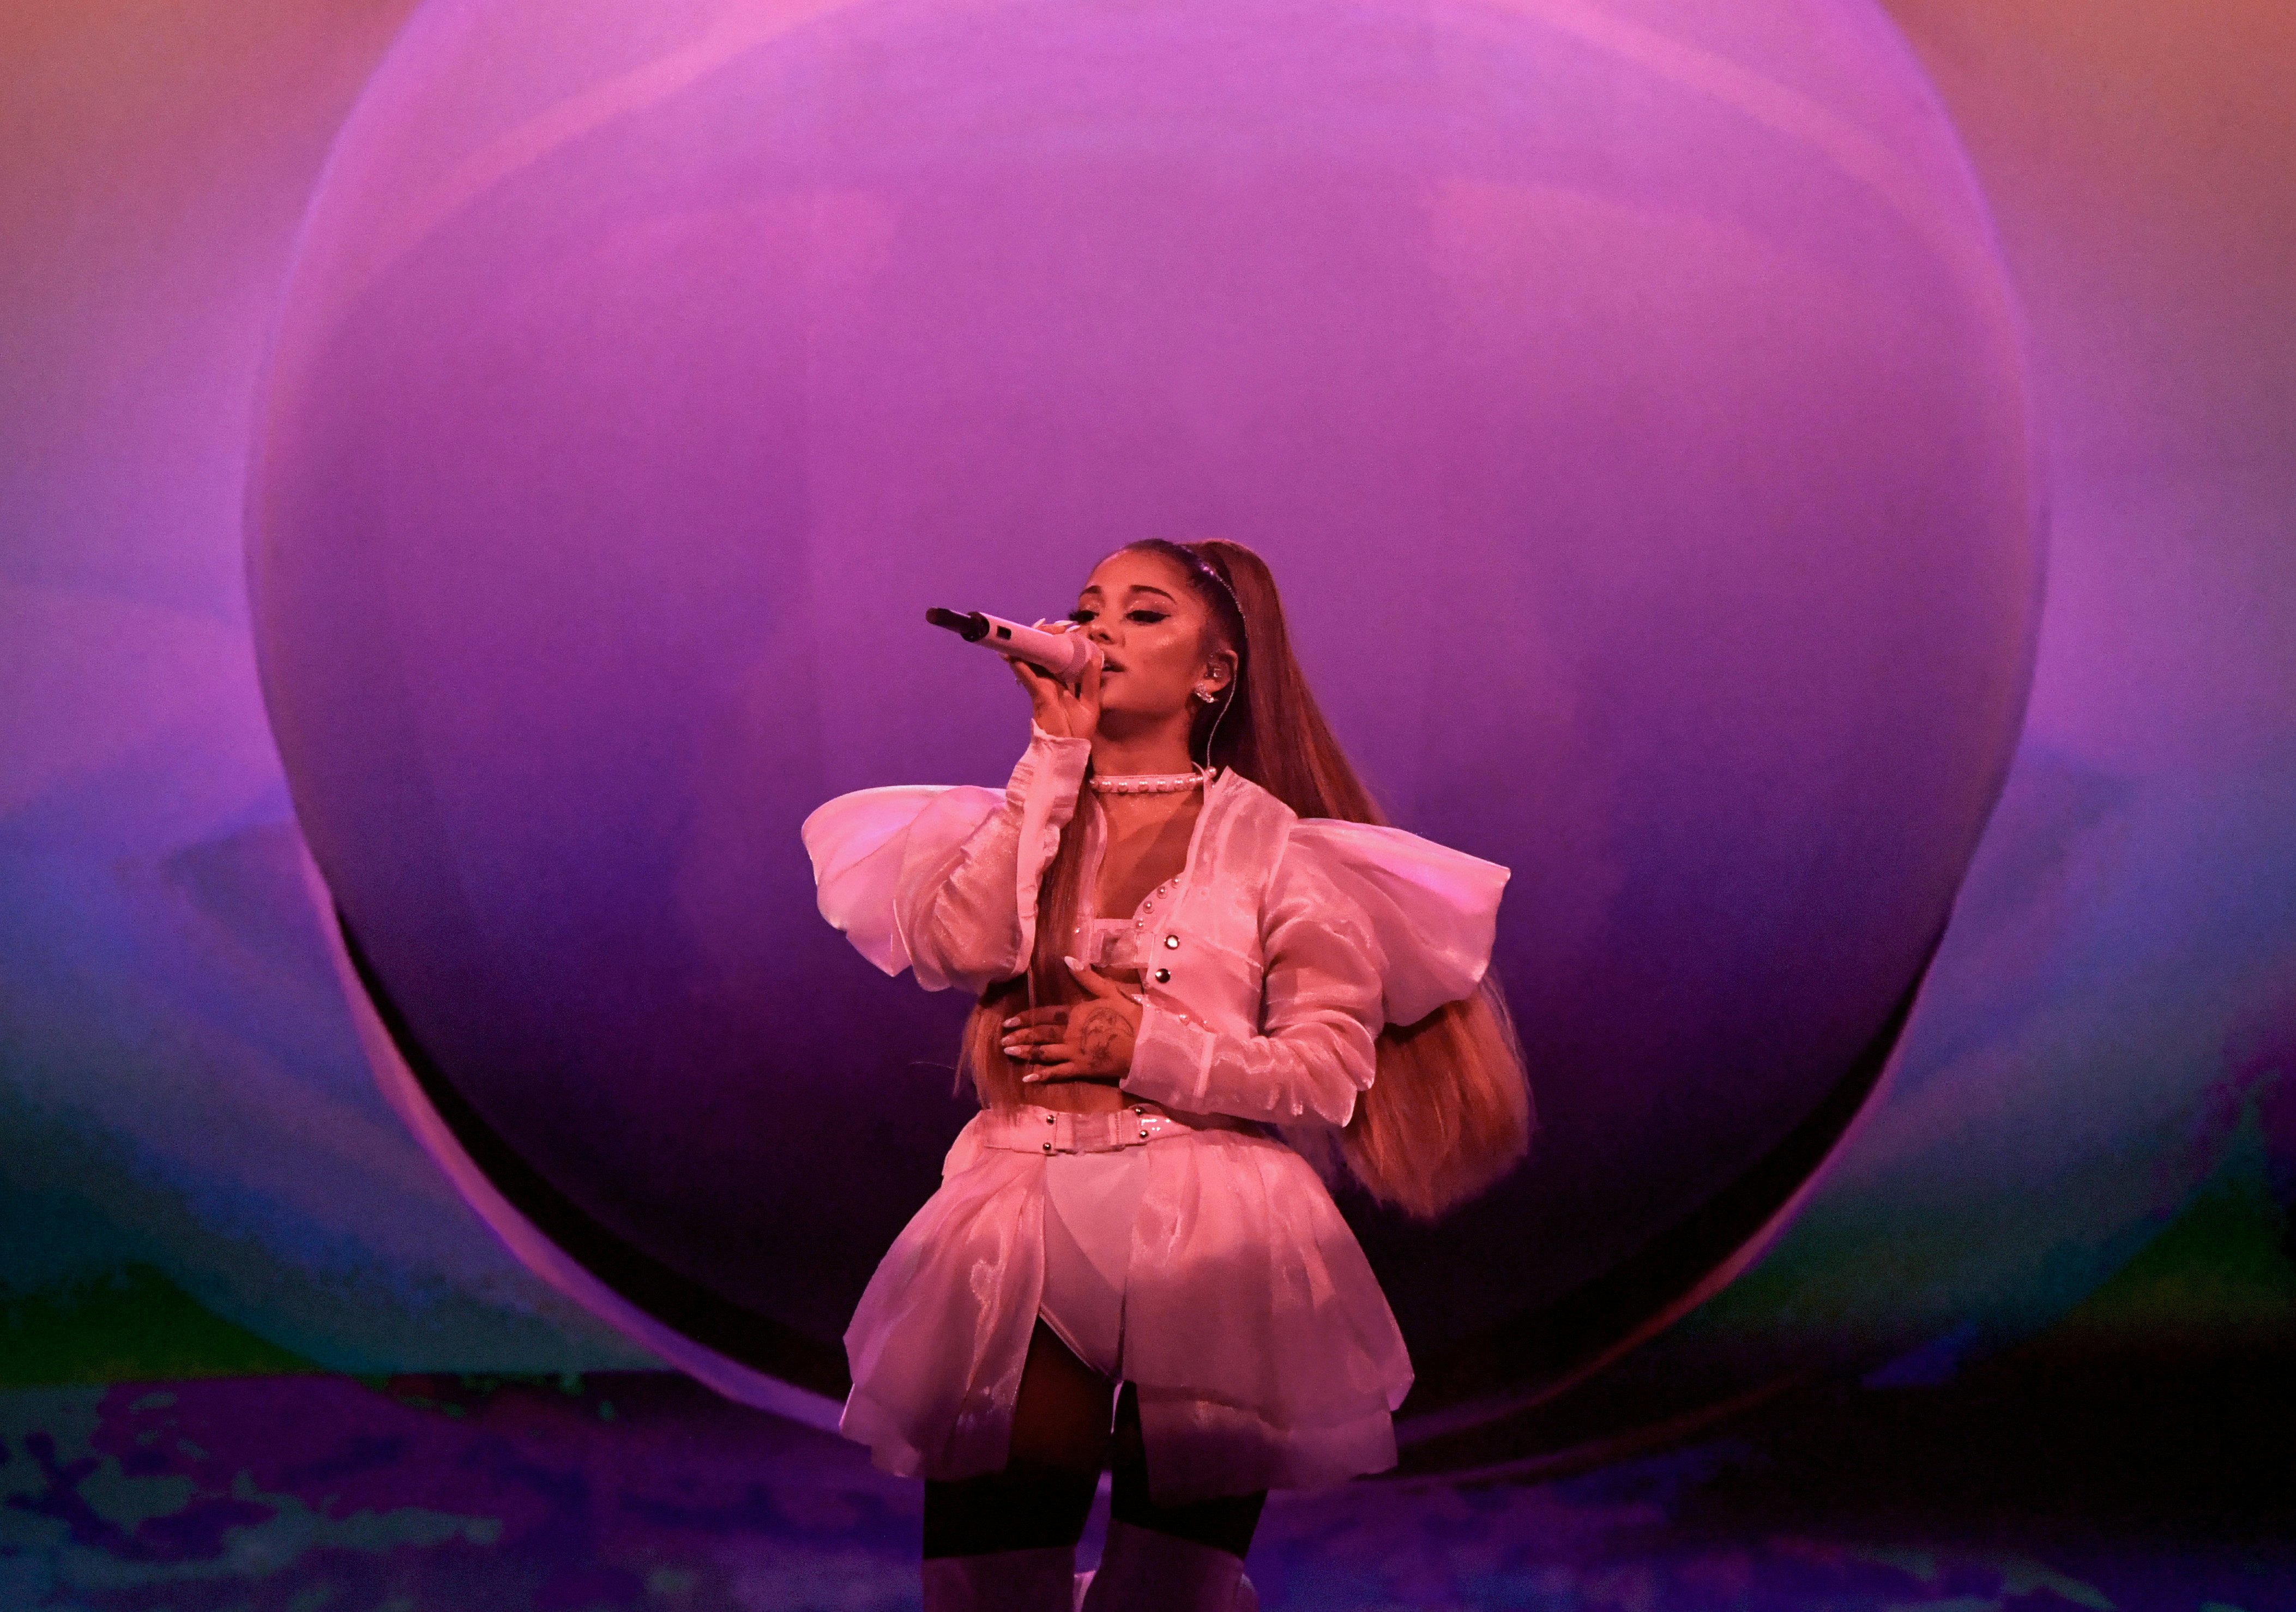 Will Ariana Grande Be At The 2019 Amas The Sweetener Tour